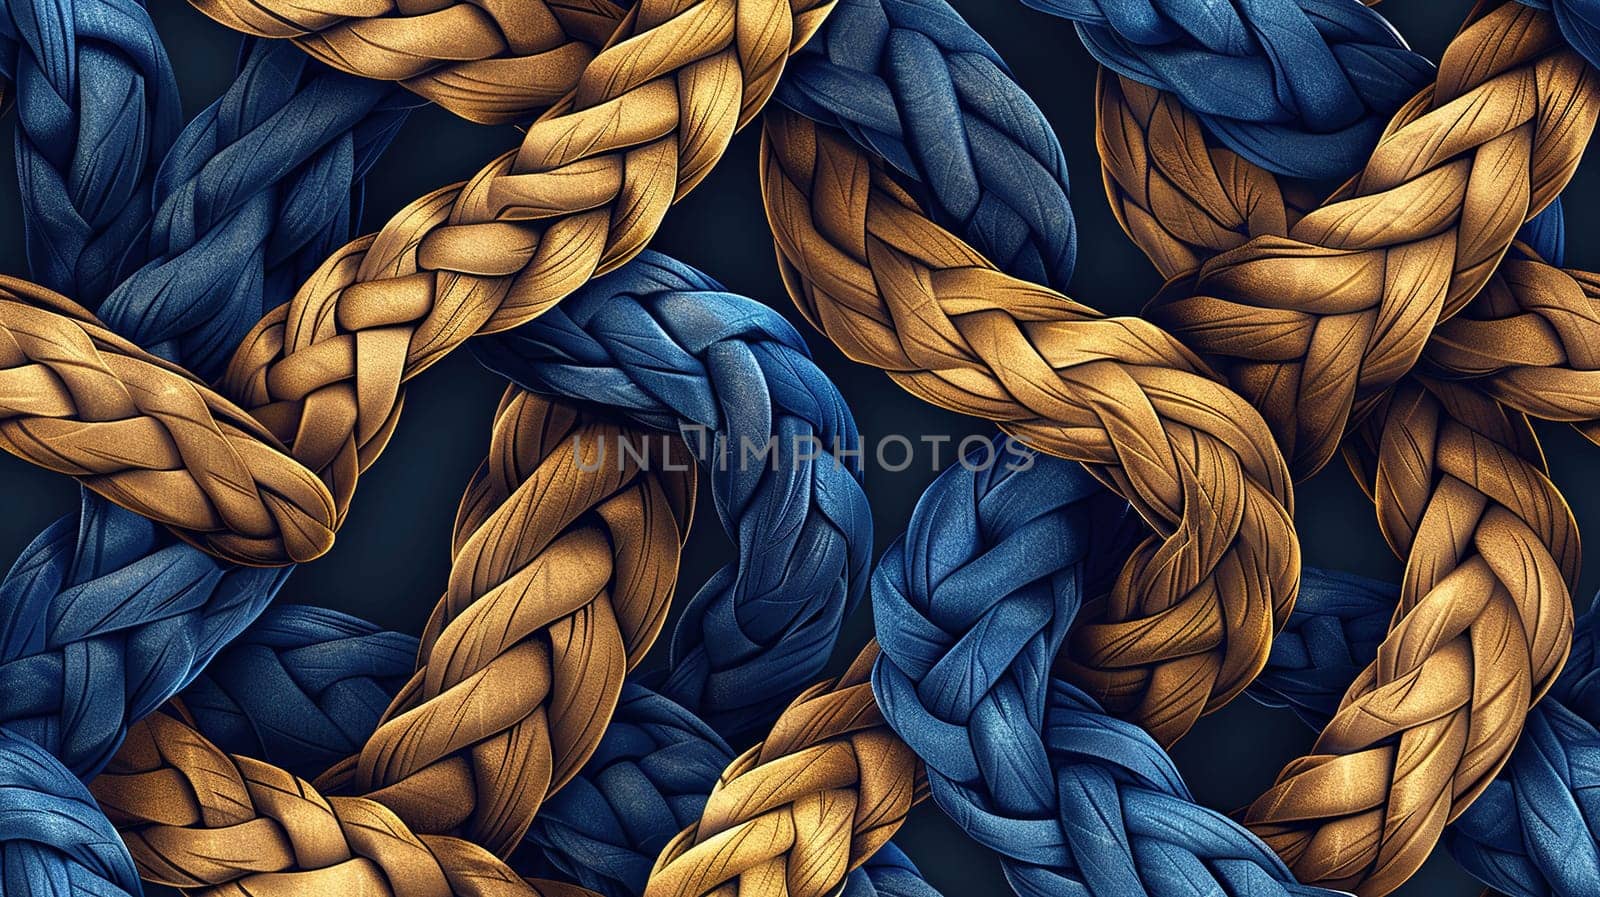 Horizontal background with rope texture. Interweaving blue and brown ropes.